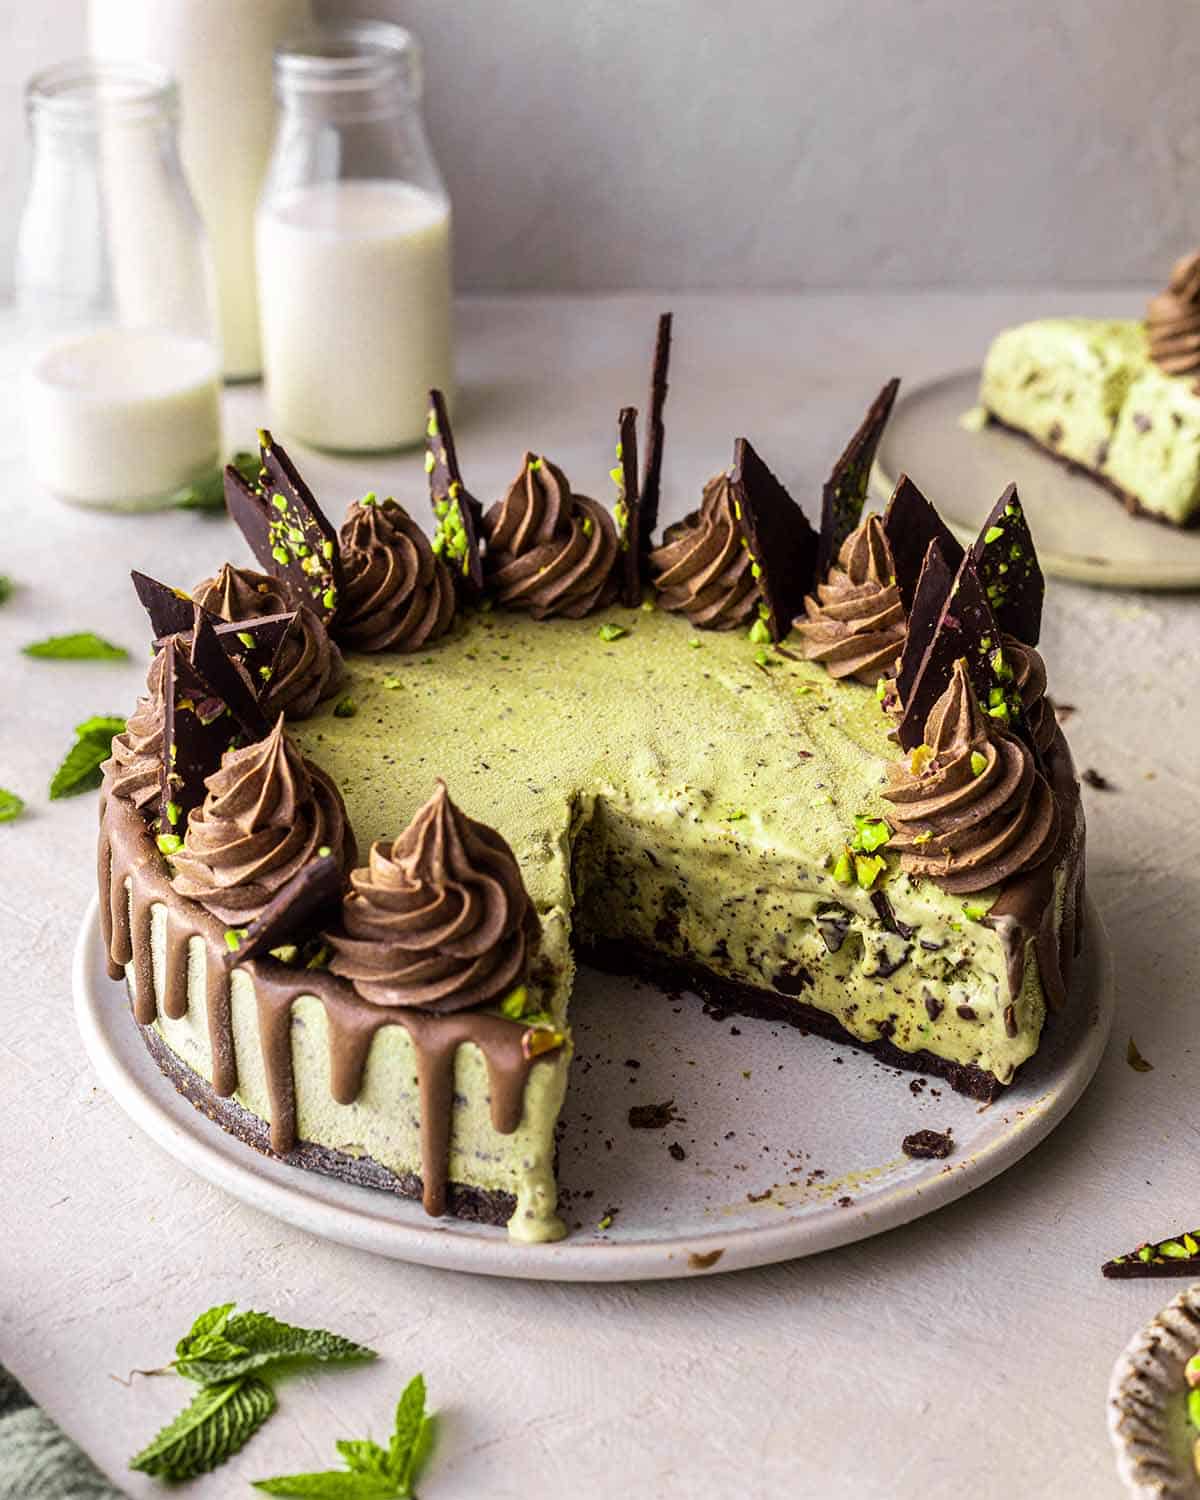 No bake vegan mint chocolate ice cream cake with a chocolate cookie crust! This fun and refreshing cake is perfect for celebrations or when you need an easy cool treat. You only need 3 ingredients and 30 minutes to prepare this cake!